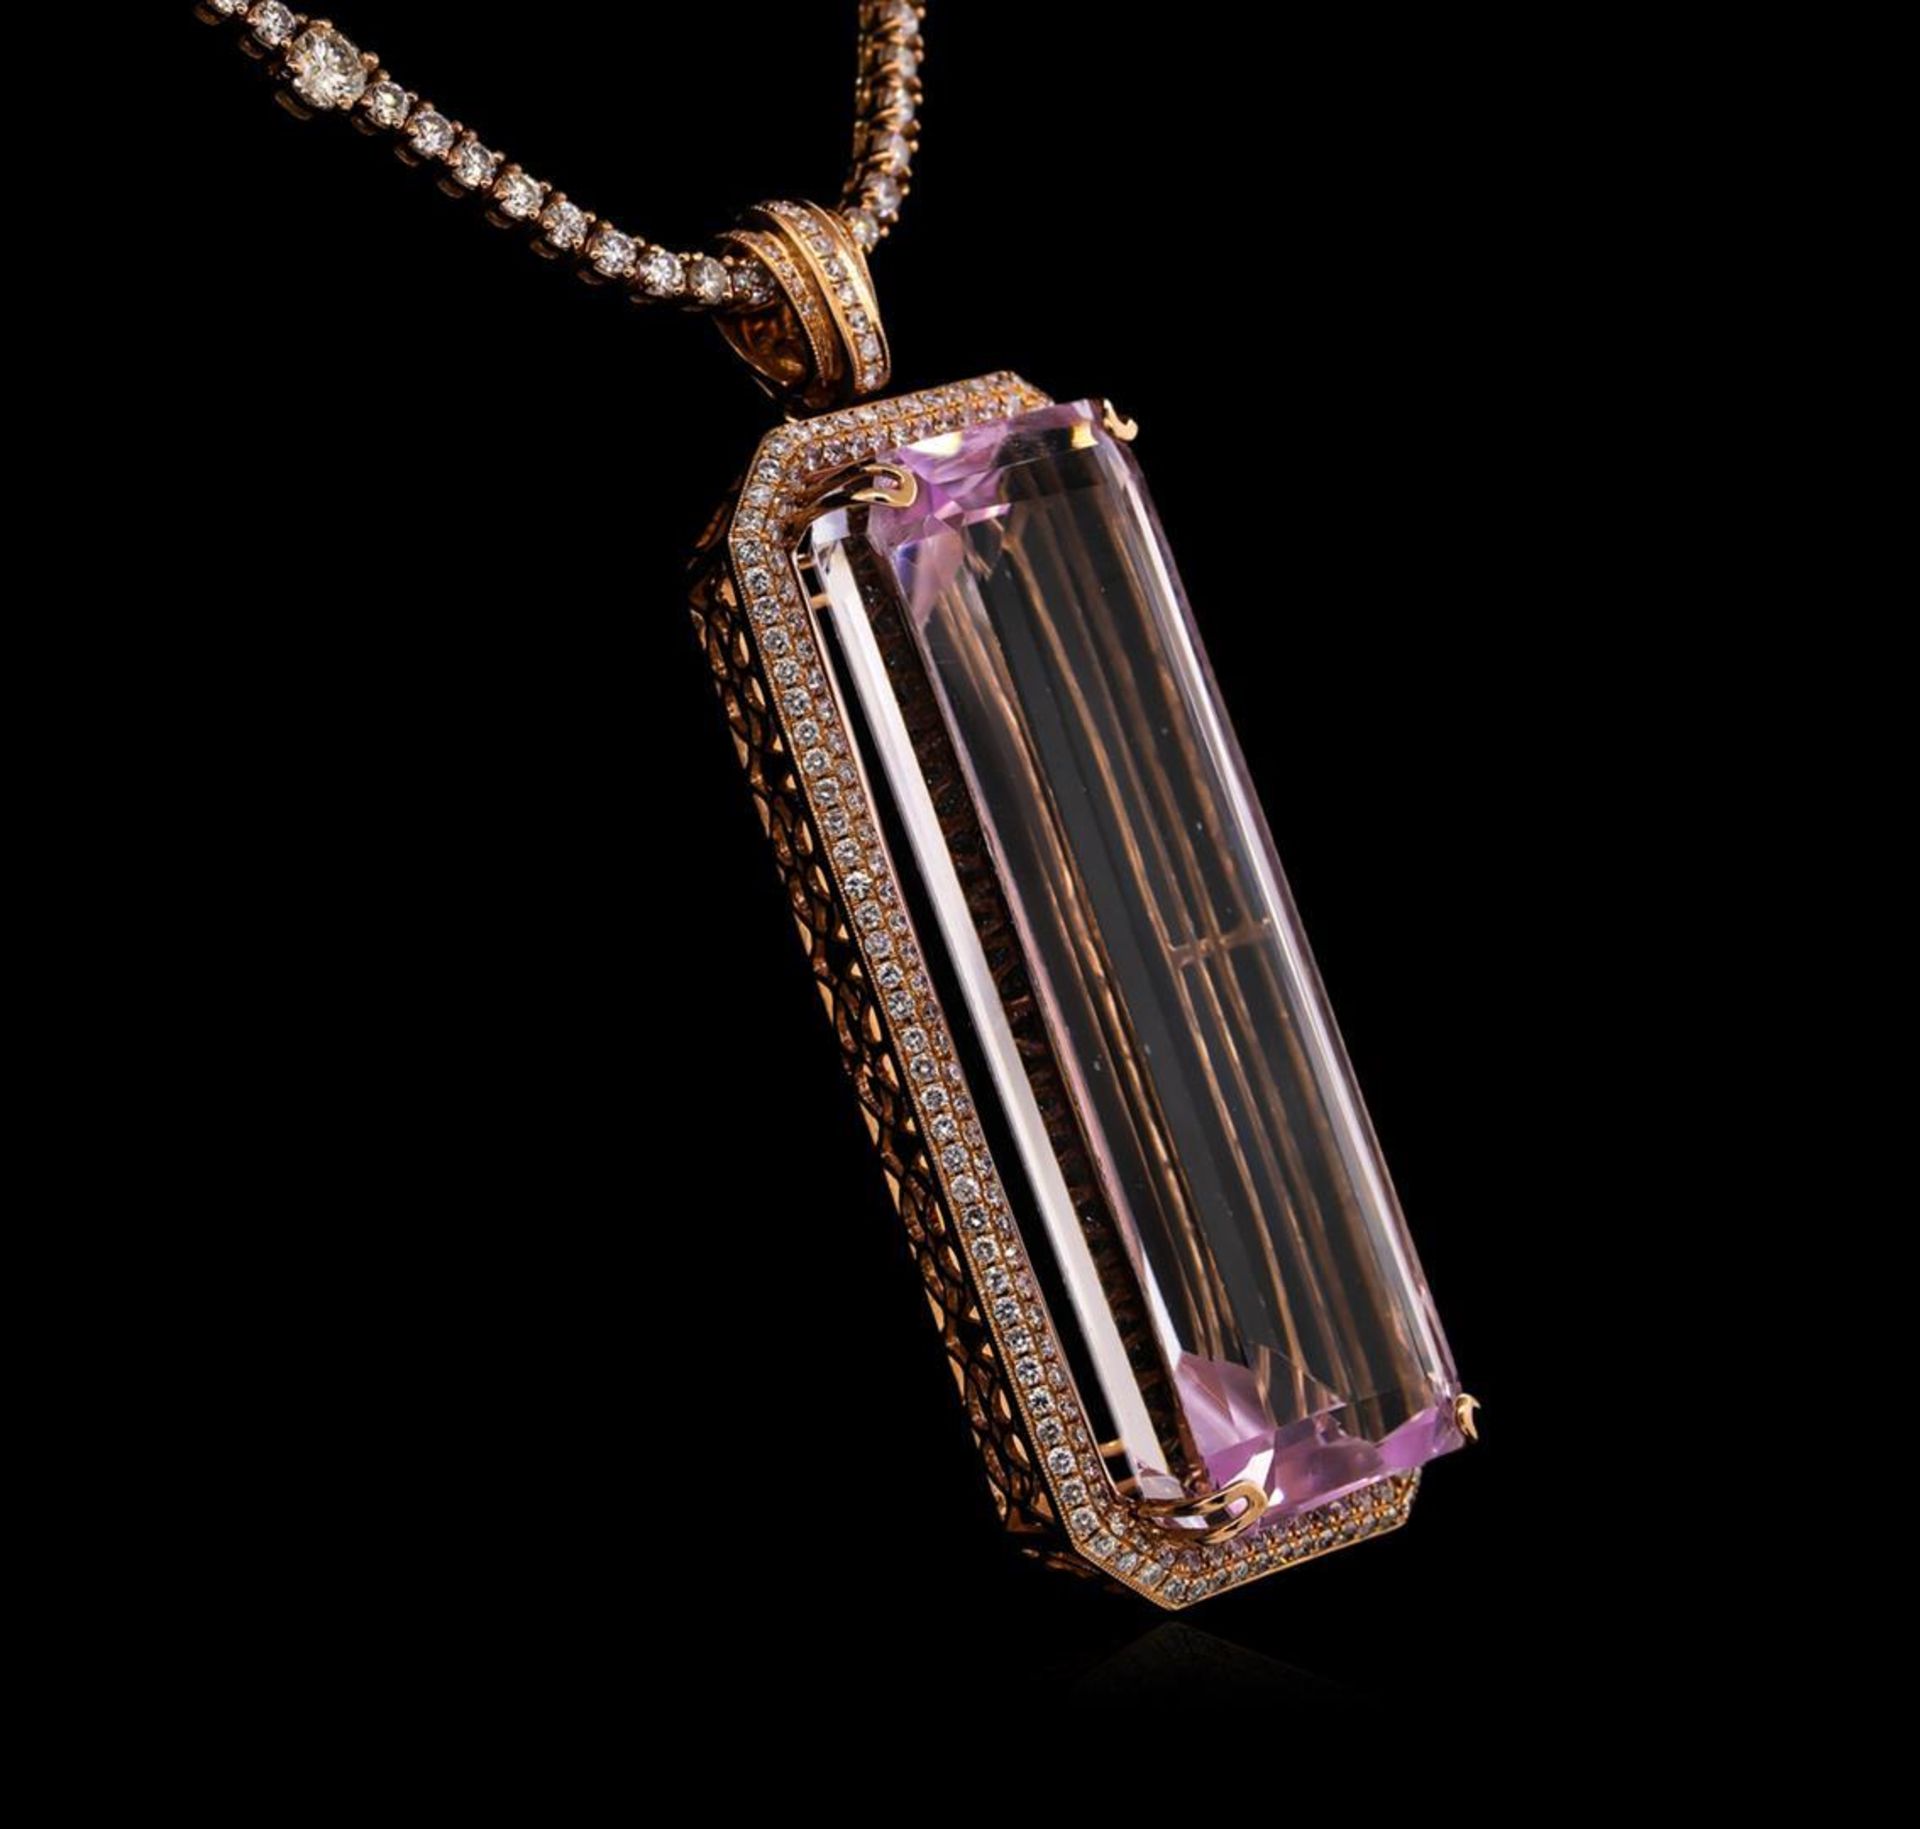 14KT Rose Gold GIA Certified 162.70 ctw Kunzite and Diamond Pendant With Chain - Image 3 of 5